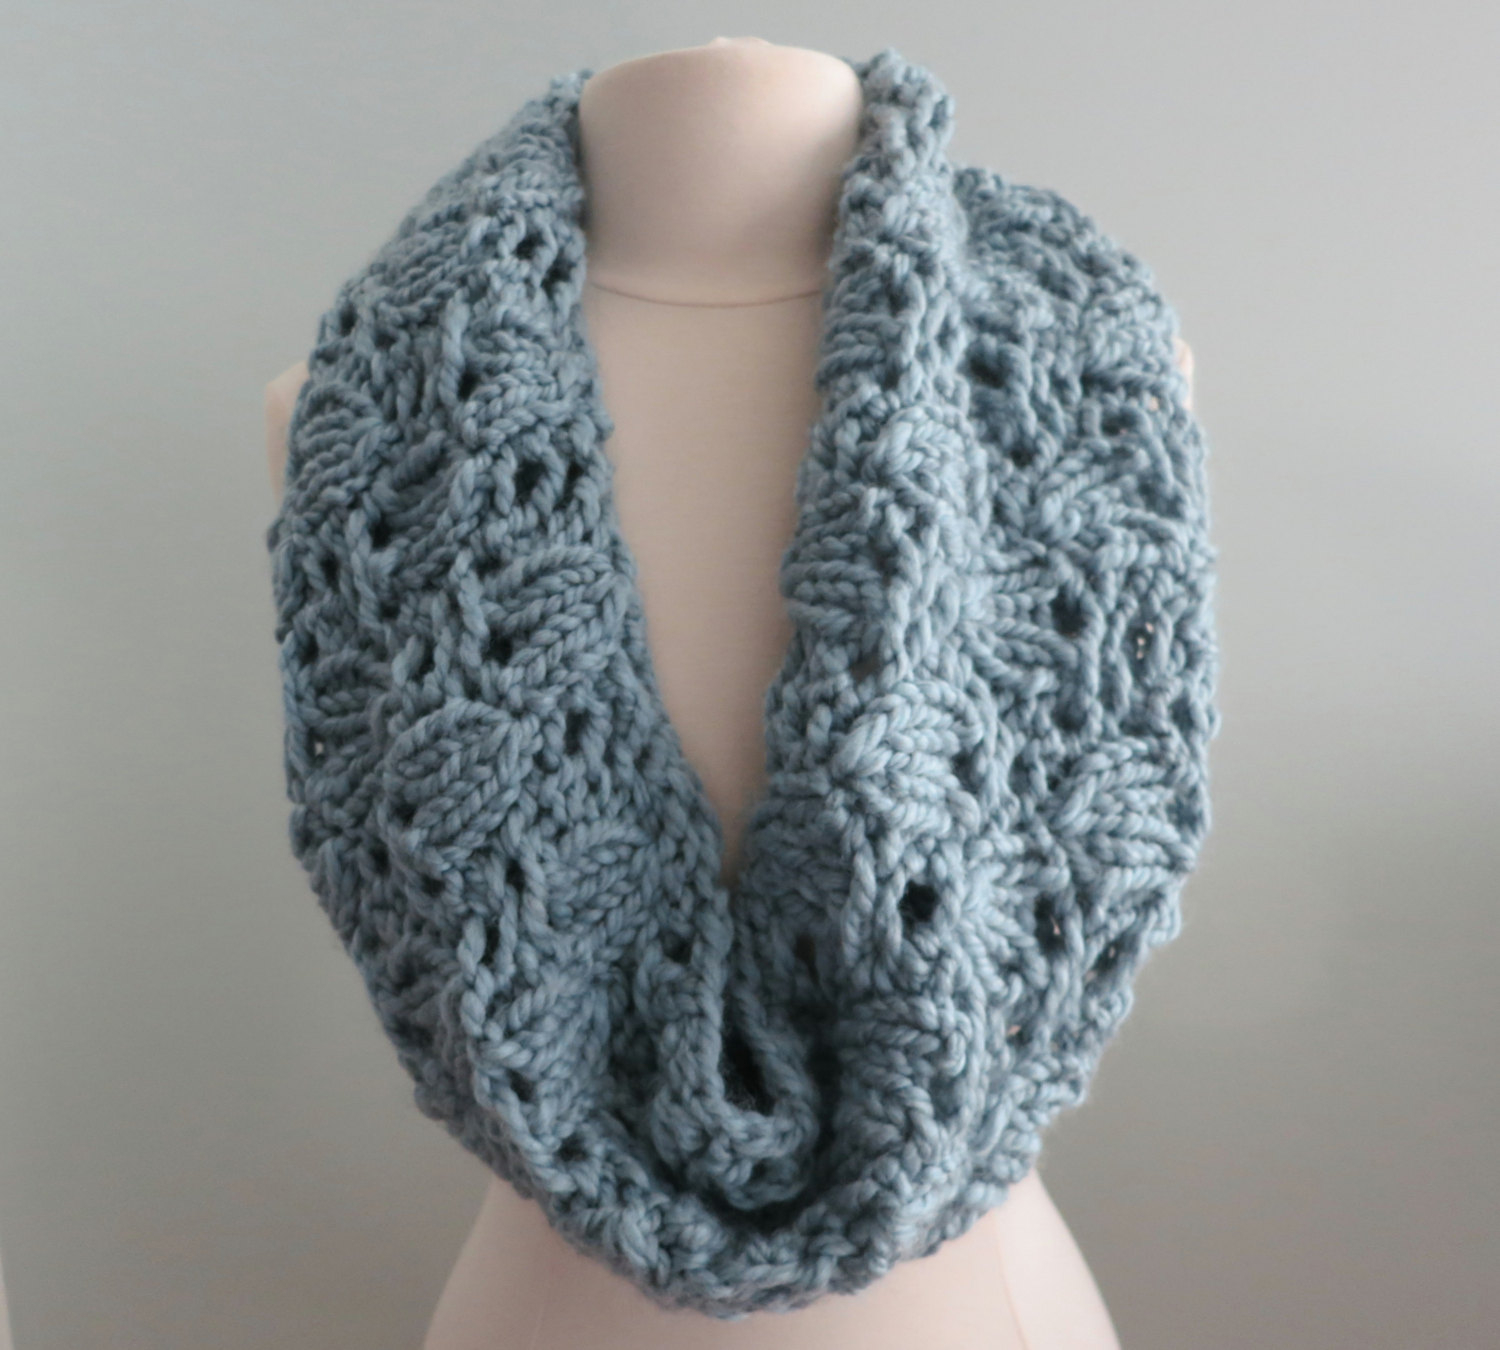 Knit Lace Cowl Pattern Knitting Pattern Cowl Infinity Scarf Super Bulky Yarn Chunky Cowl Lace Cowl